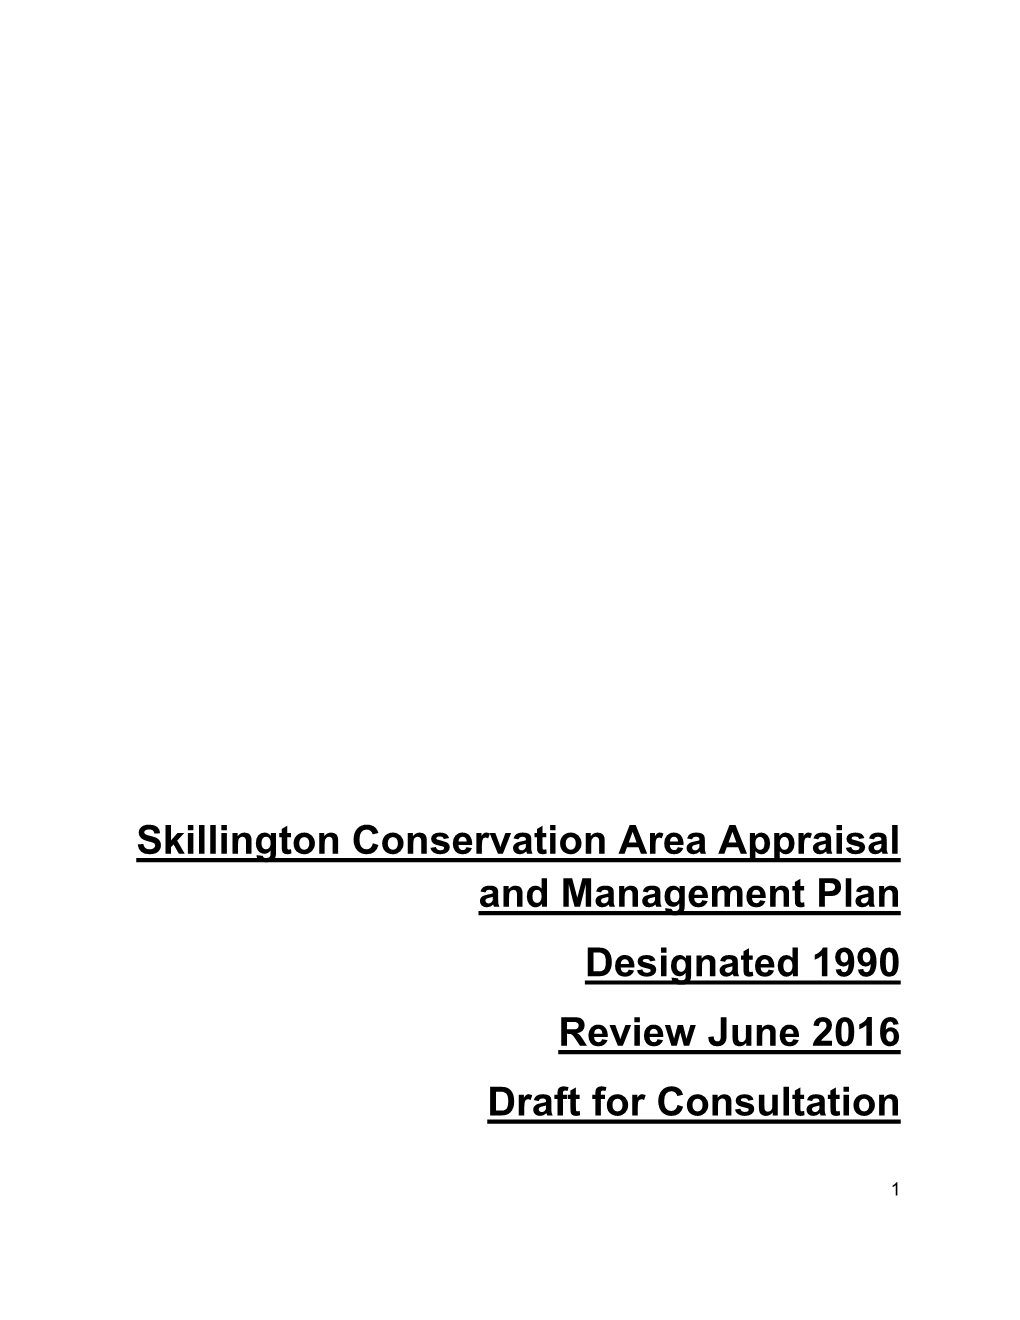 Skillington Conservation Area Appraisal and Management Plan Designated 1990 Review June 2016 Draft for Consultation